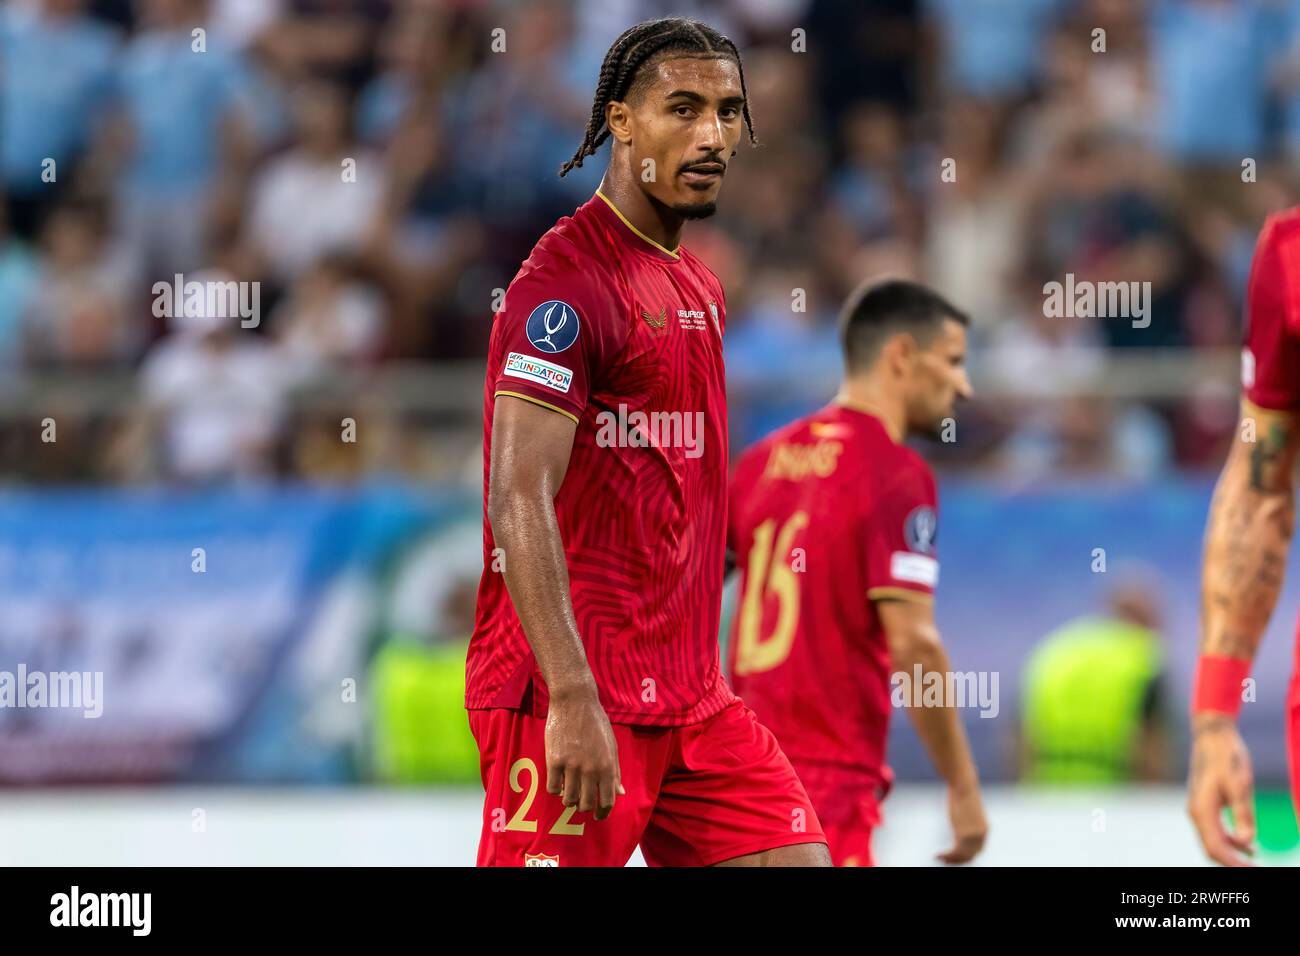 Athens, Greece - August 16,2023: Player of Loic Bade in action during the UEFA Super Cup Final match between Manchester City and Sevilla at Stadio Kar Stock Photo